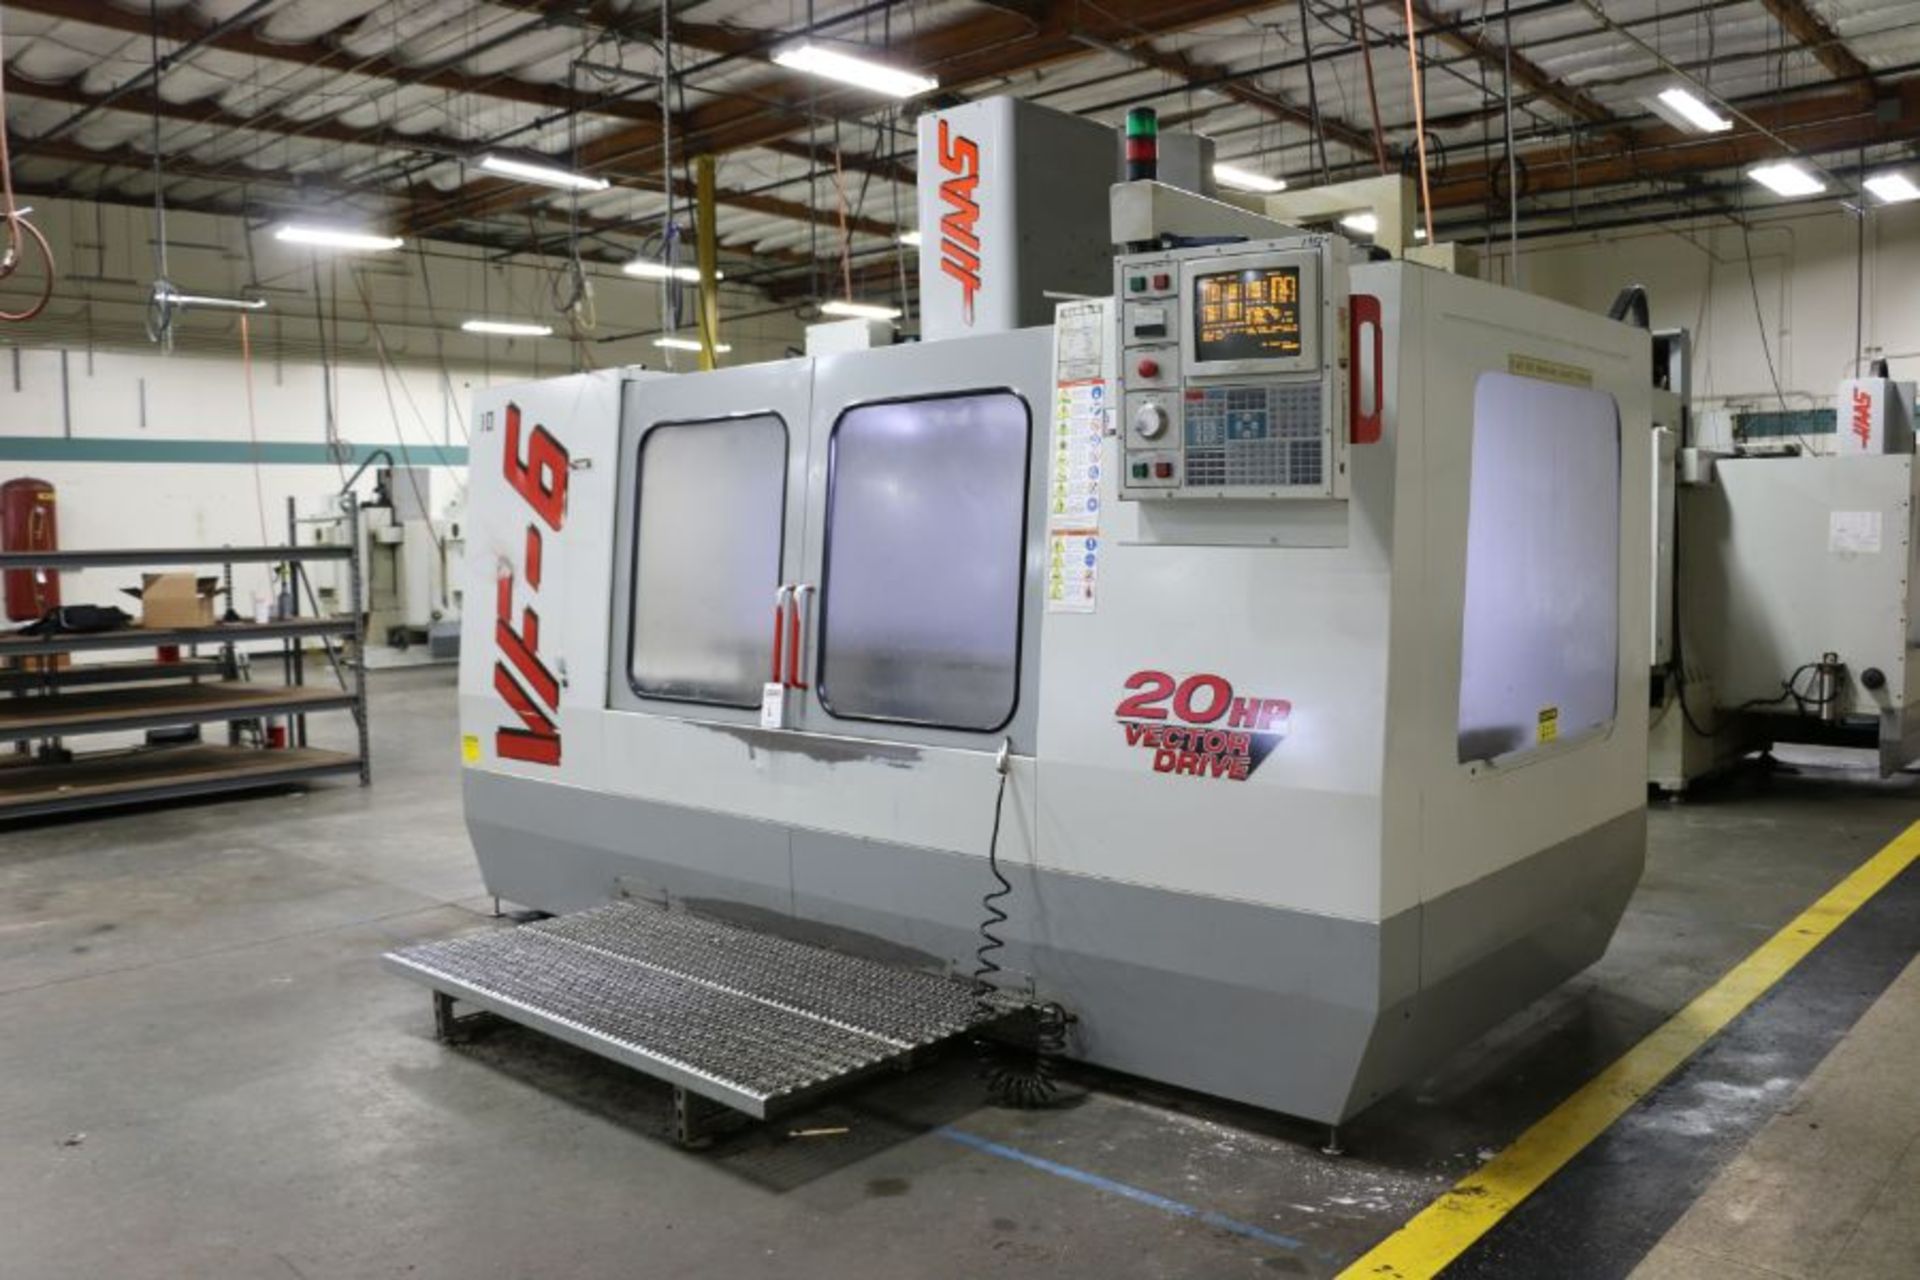 Haas VF-6, 64” x 32” x 30” Travels, 20 Position Tool Carousel, CTS, CT-40 Taper, s/n 12997, New 1998 - Image 2 of 12